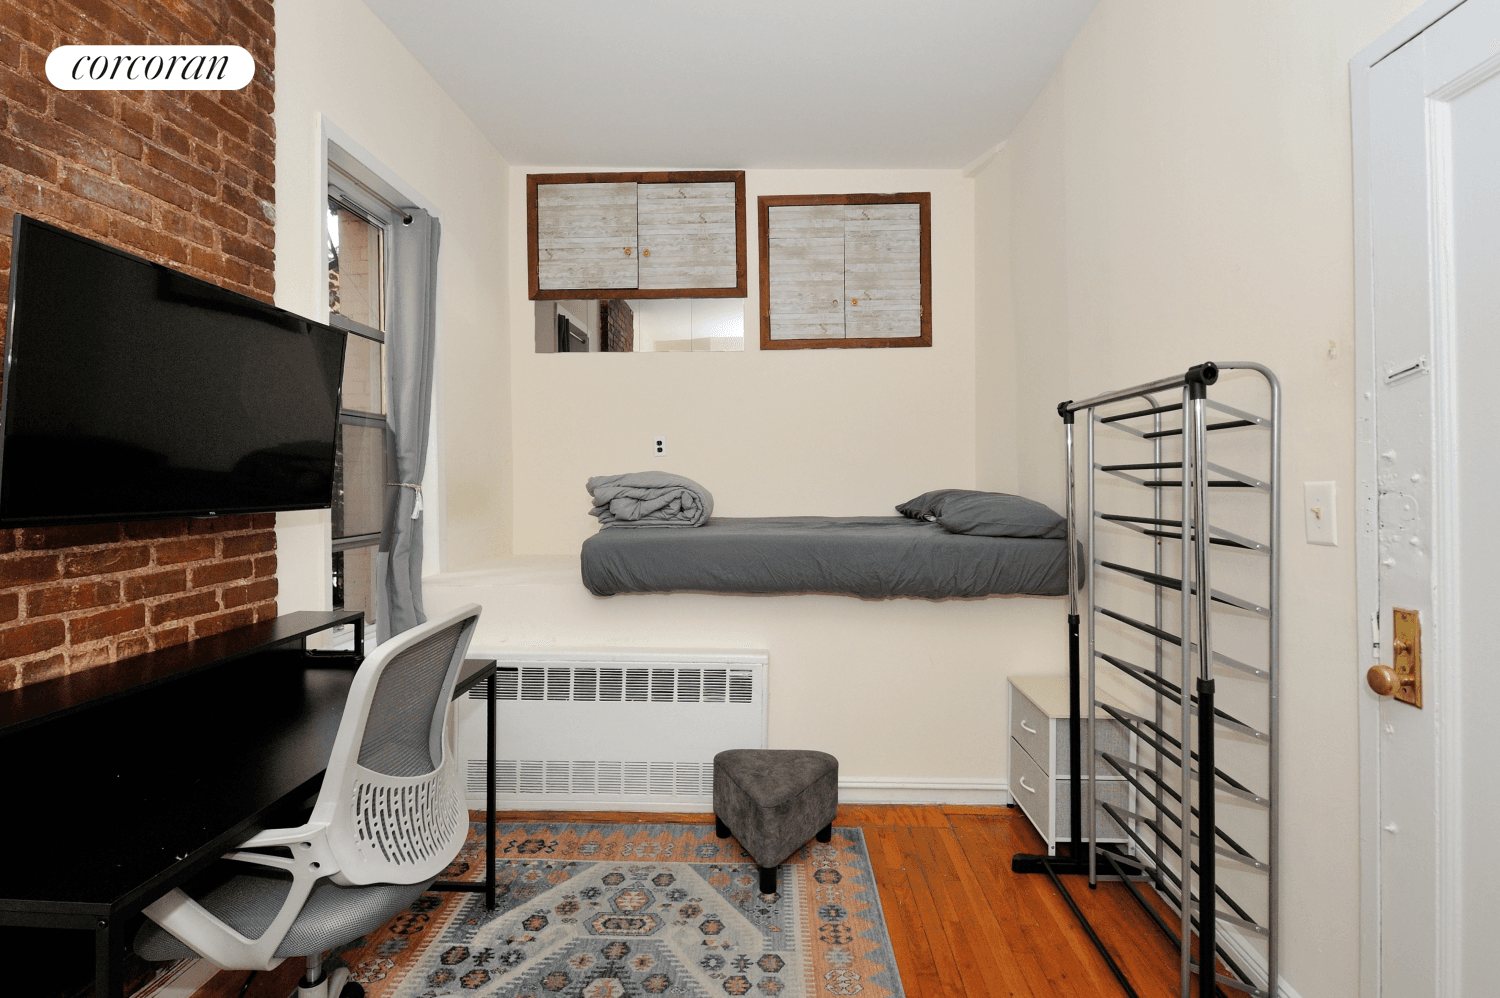 Fully furnished Upper East side Studio apartment Sunny Apartment 3 flight walk up Near many restaurants, cafes, and night time activities can walk to Central Park Dedicated work space Fully ...